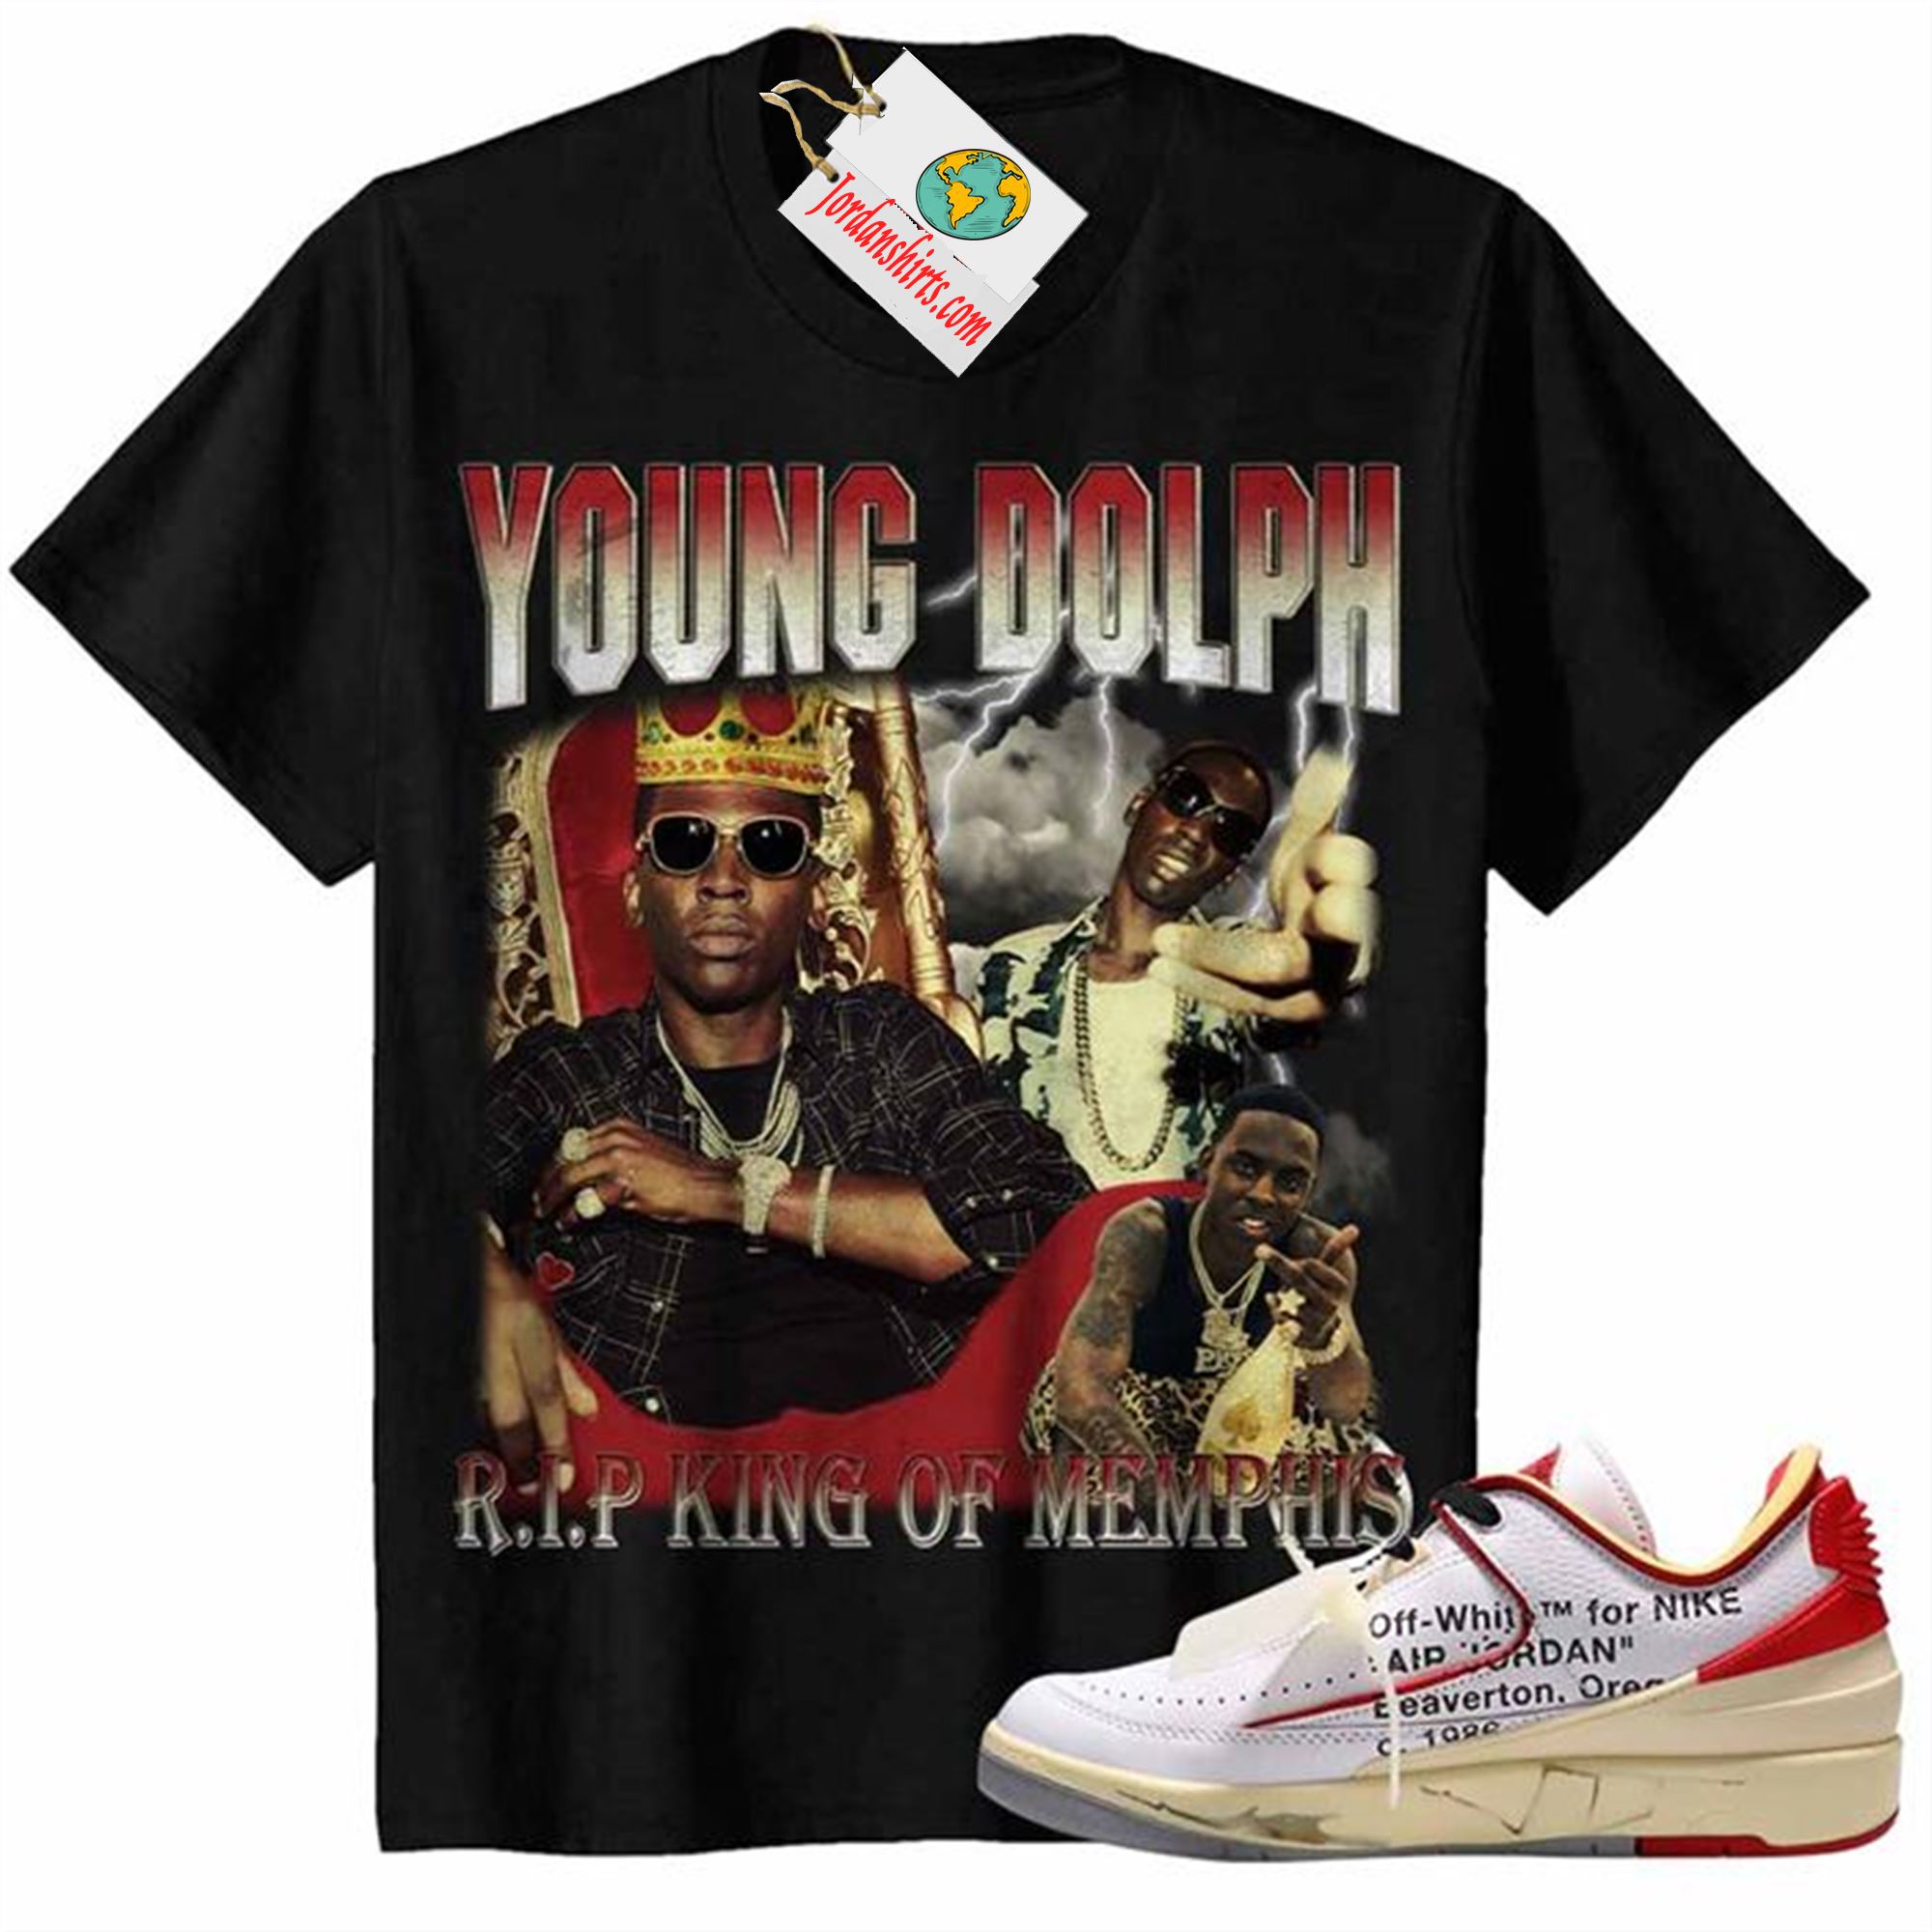 Jordan 2 Shirt, Rip King Of Memphis Young Dolph Vintage Black Air Jordan 2 Low White Red Off-white 2s Full Size Up To 5xl